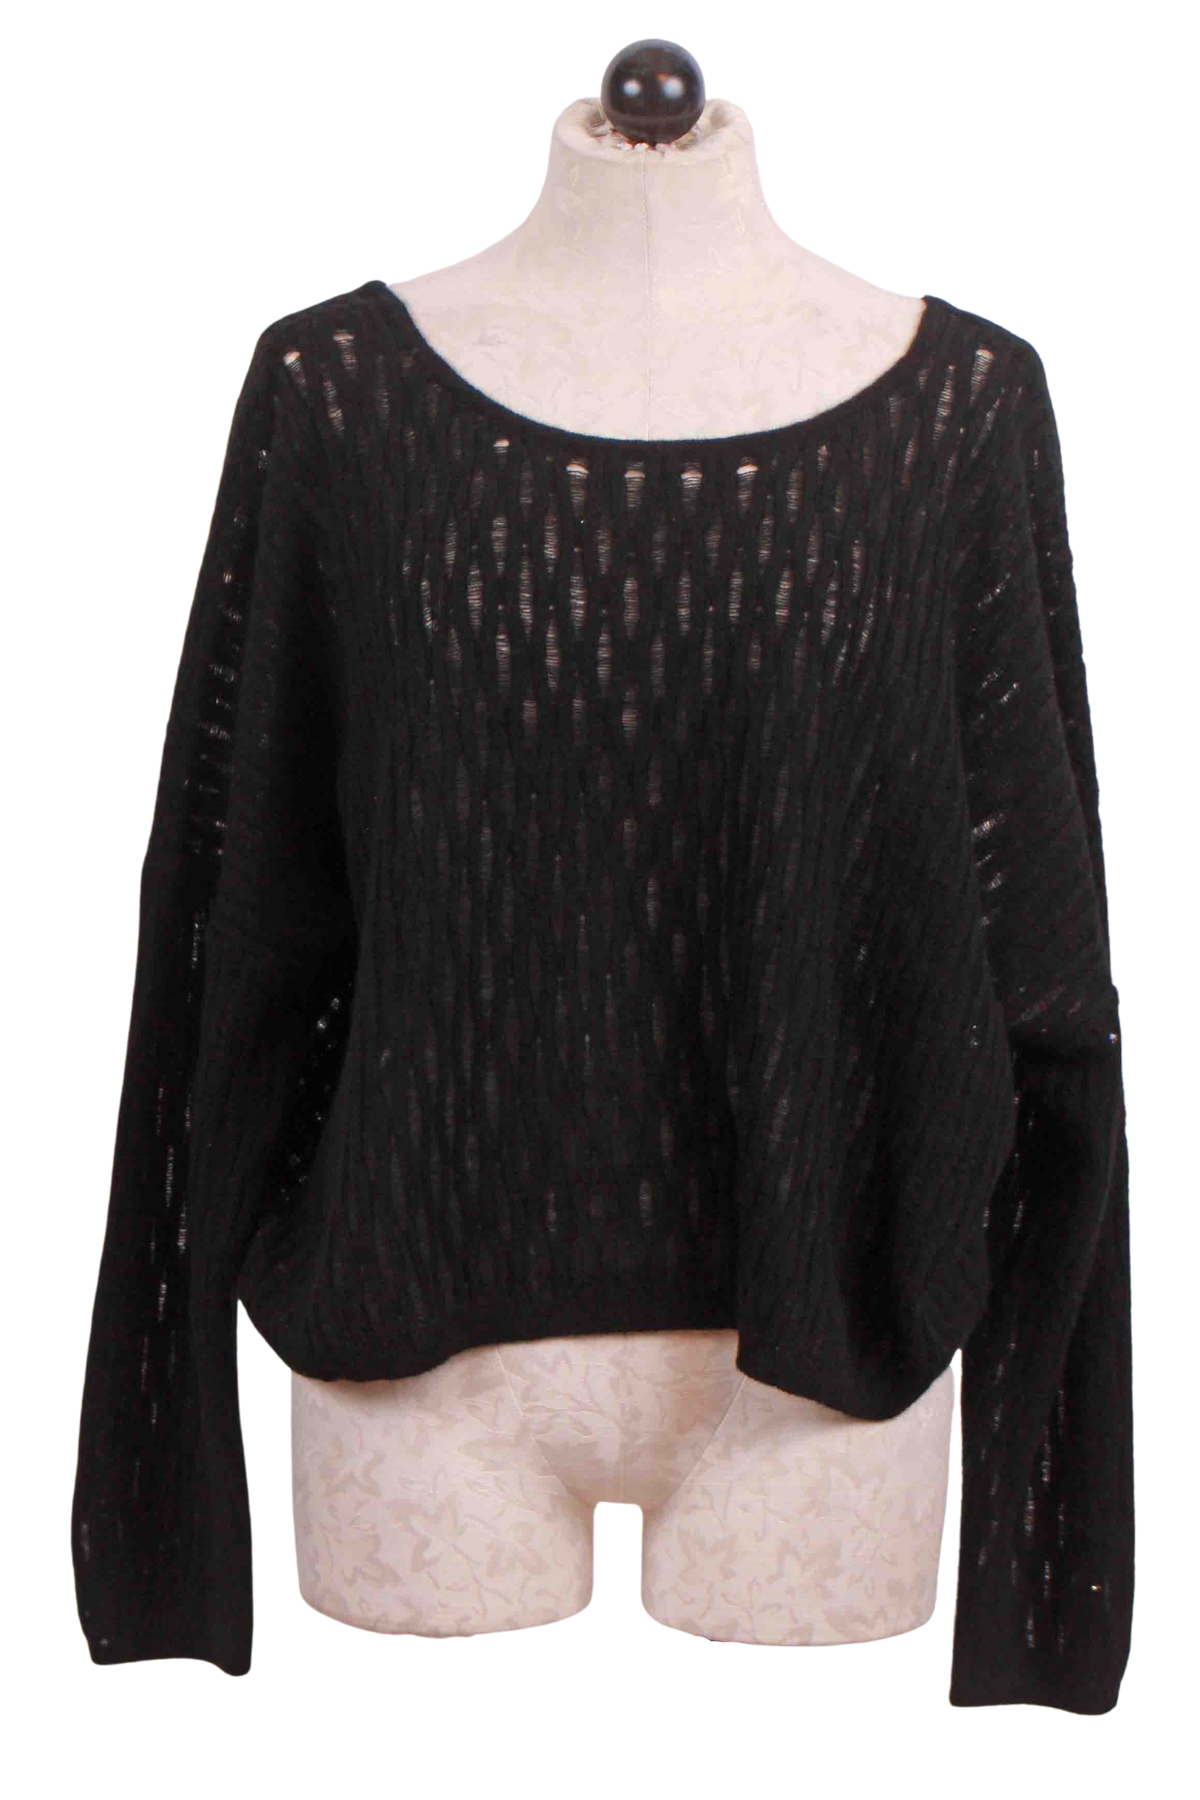 Black Cropped Pointelle Nala Sexy V-Back Cashmere Sweater by Crush